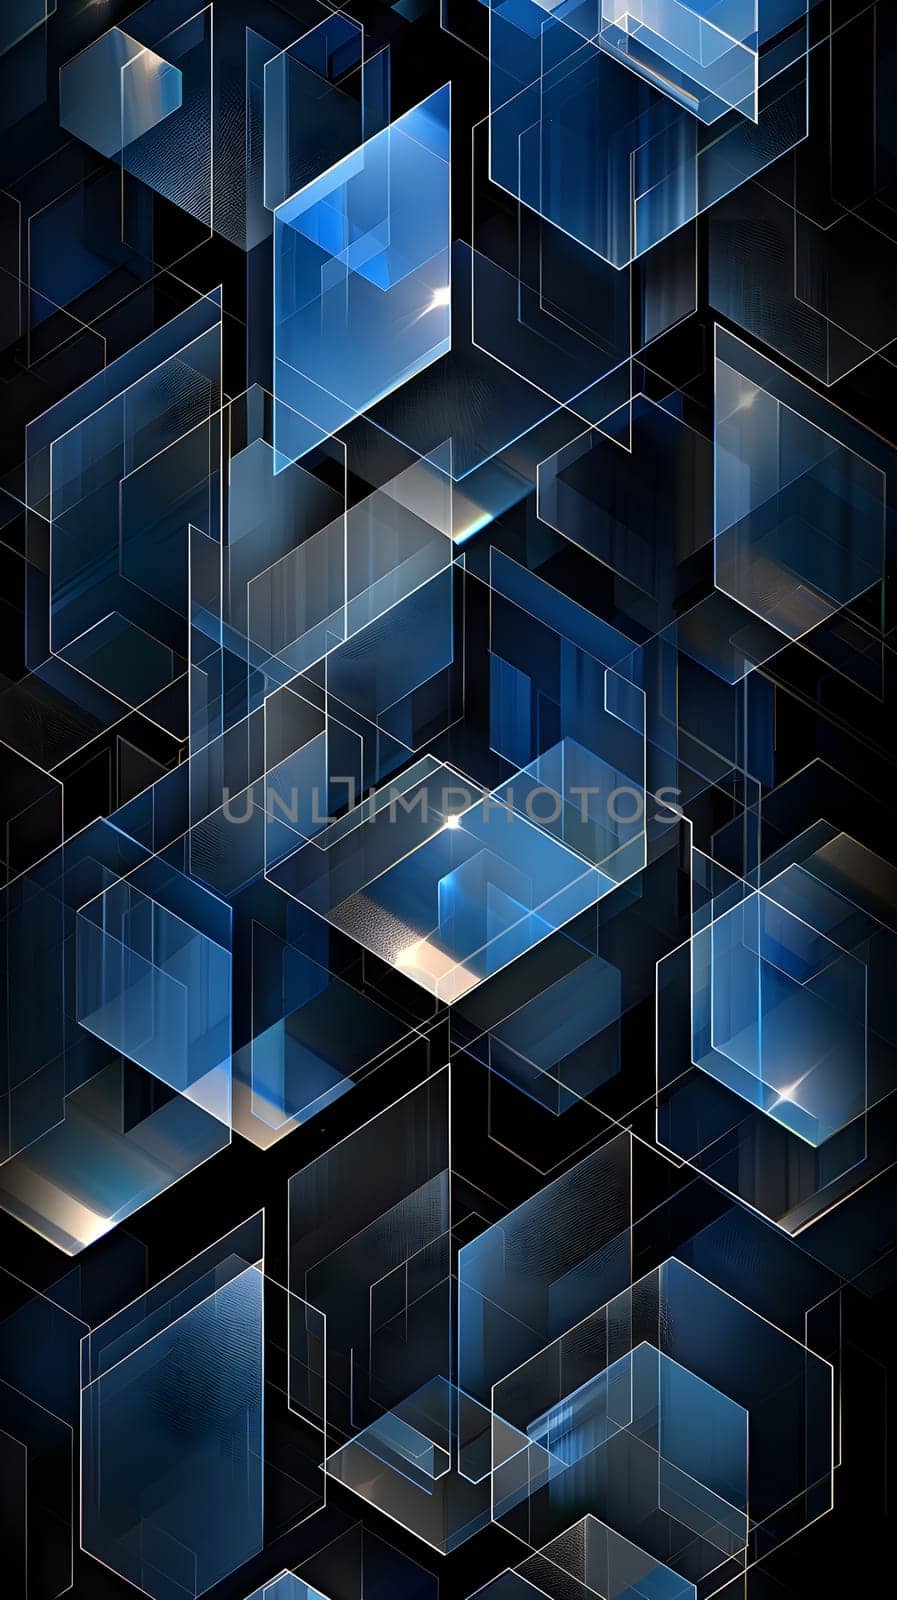 Electric blue rectangles floating in symmetry on black backdrop by Nadtochiy